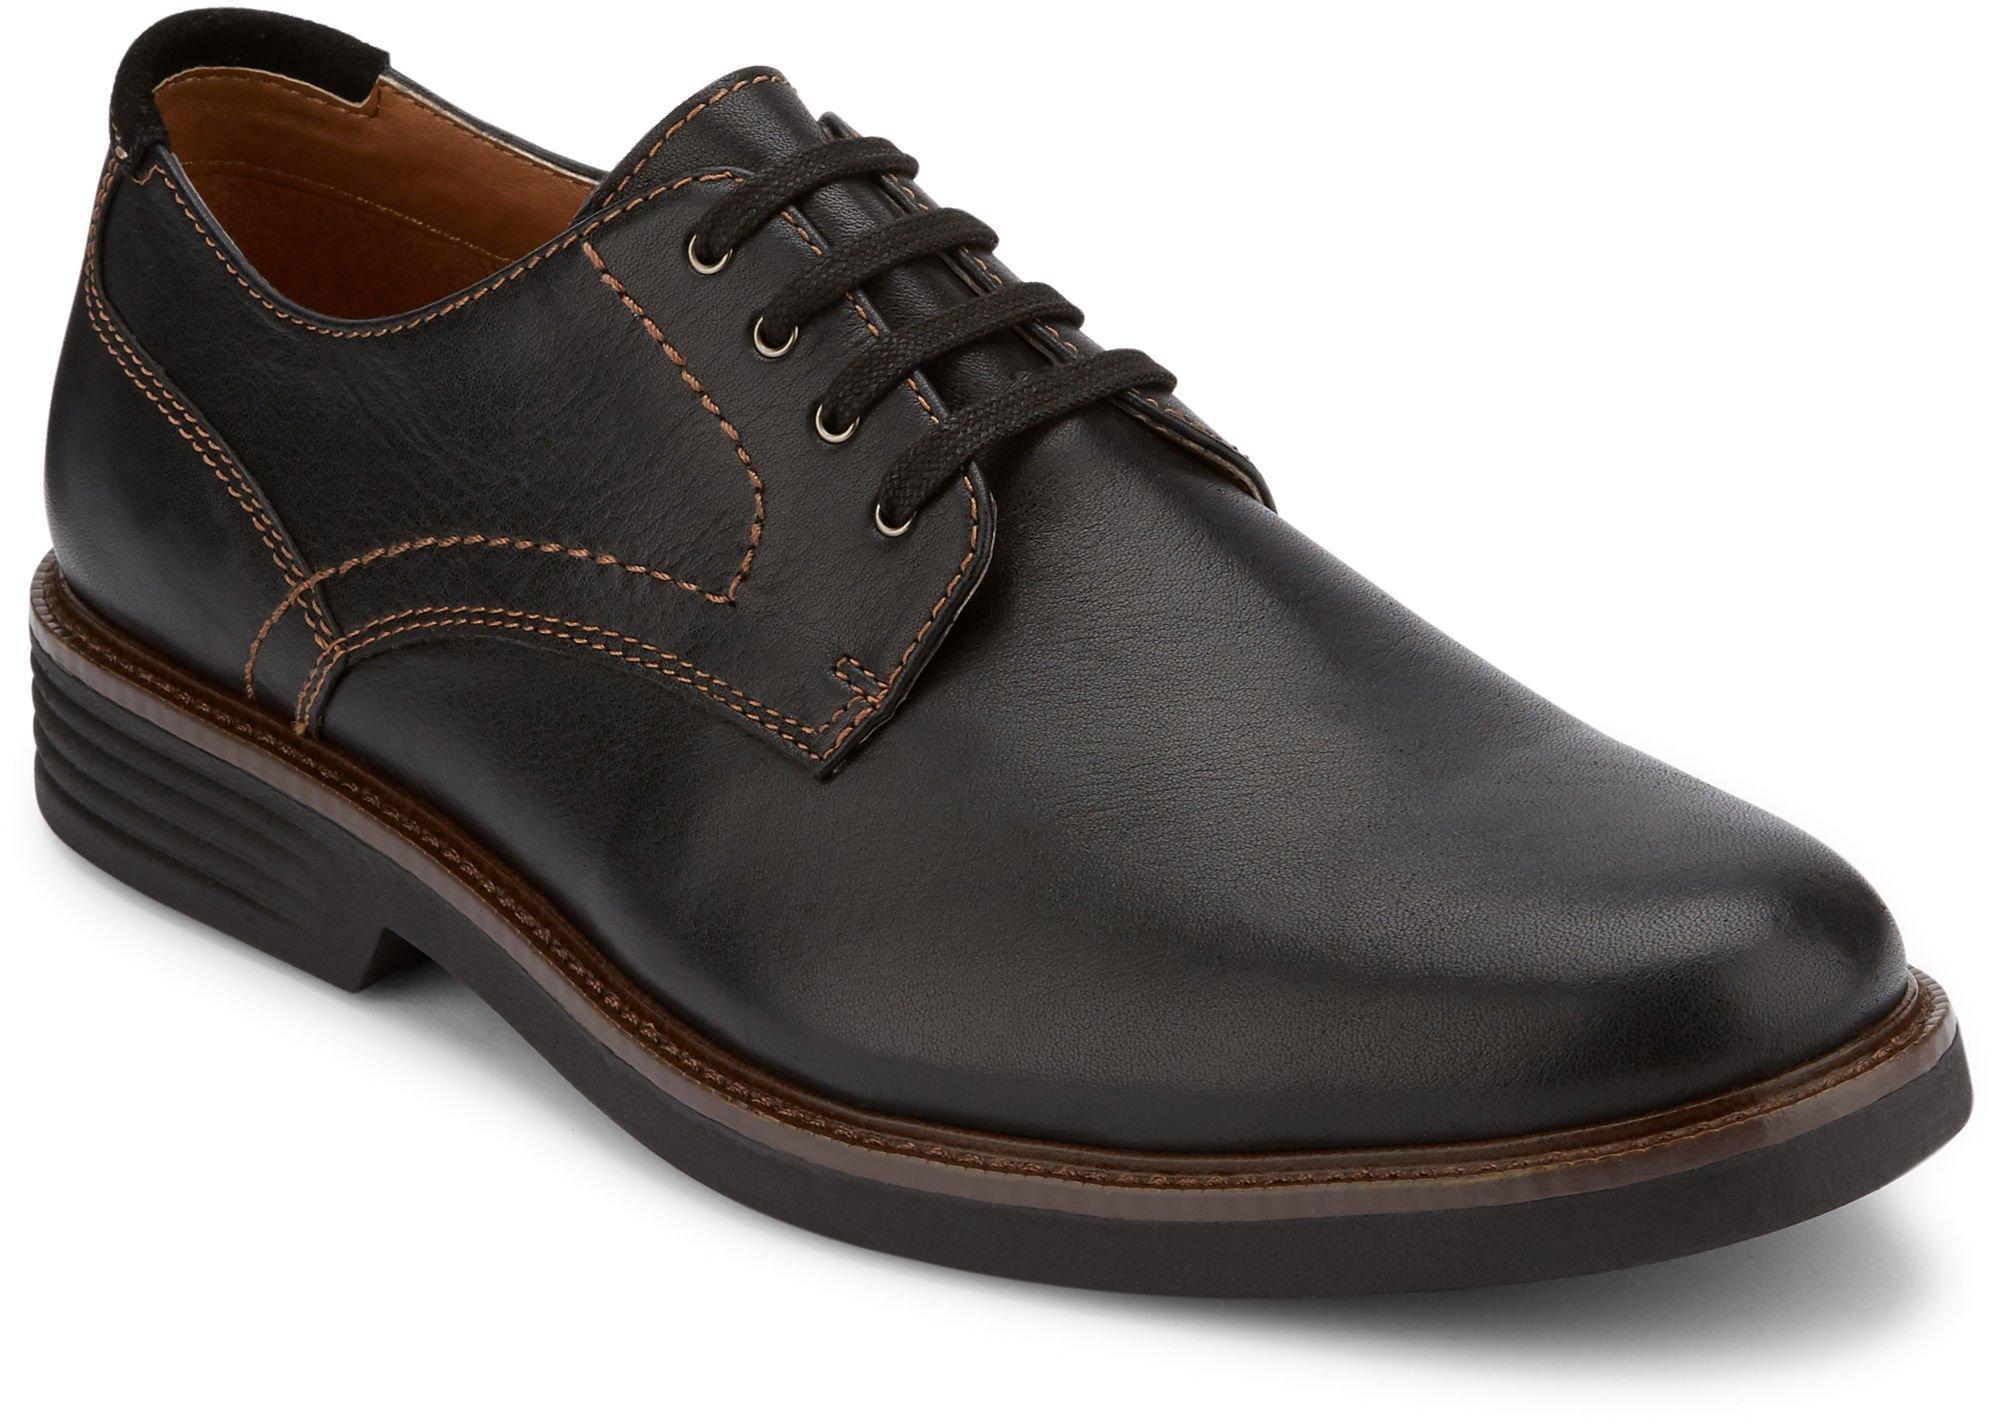 Dockers Mens Parkway Oxfords Shoes